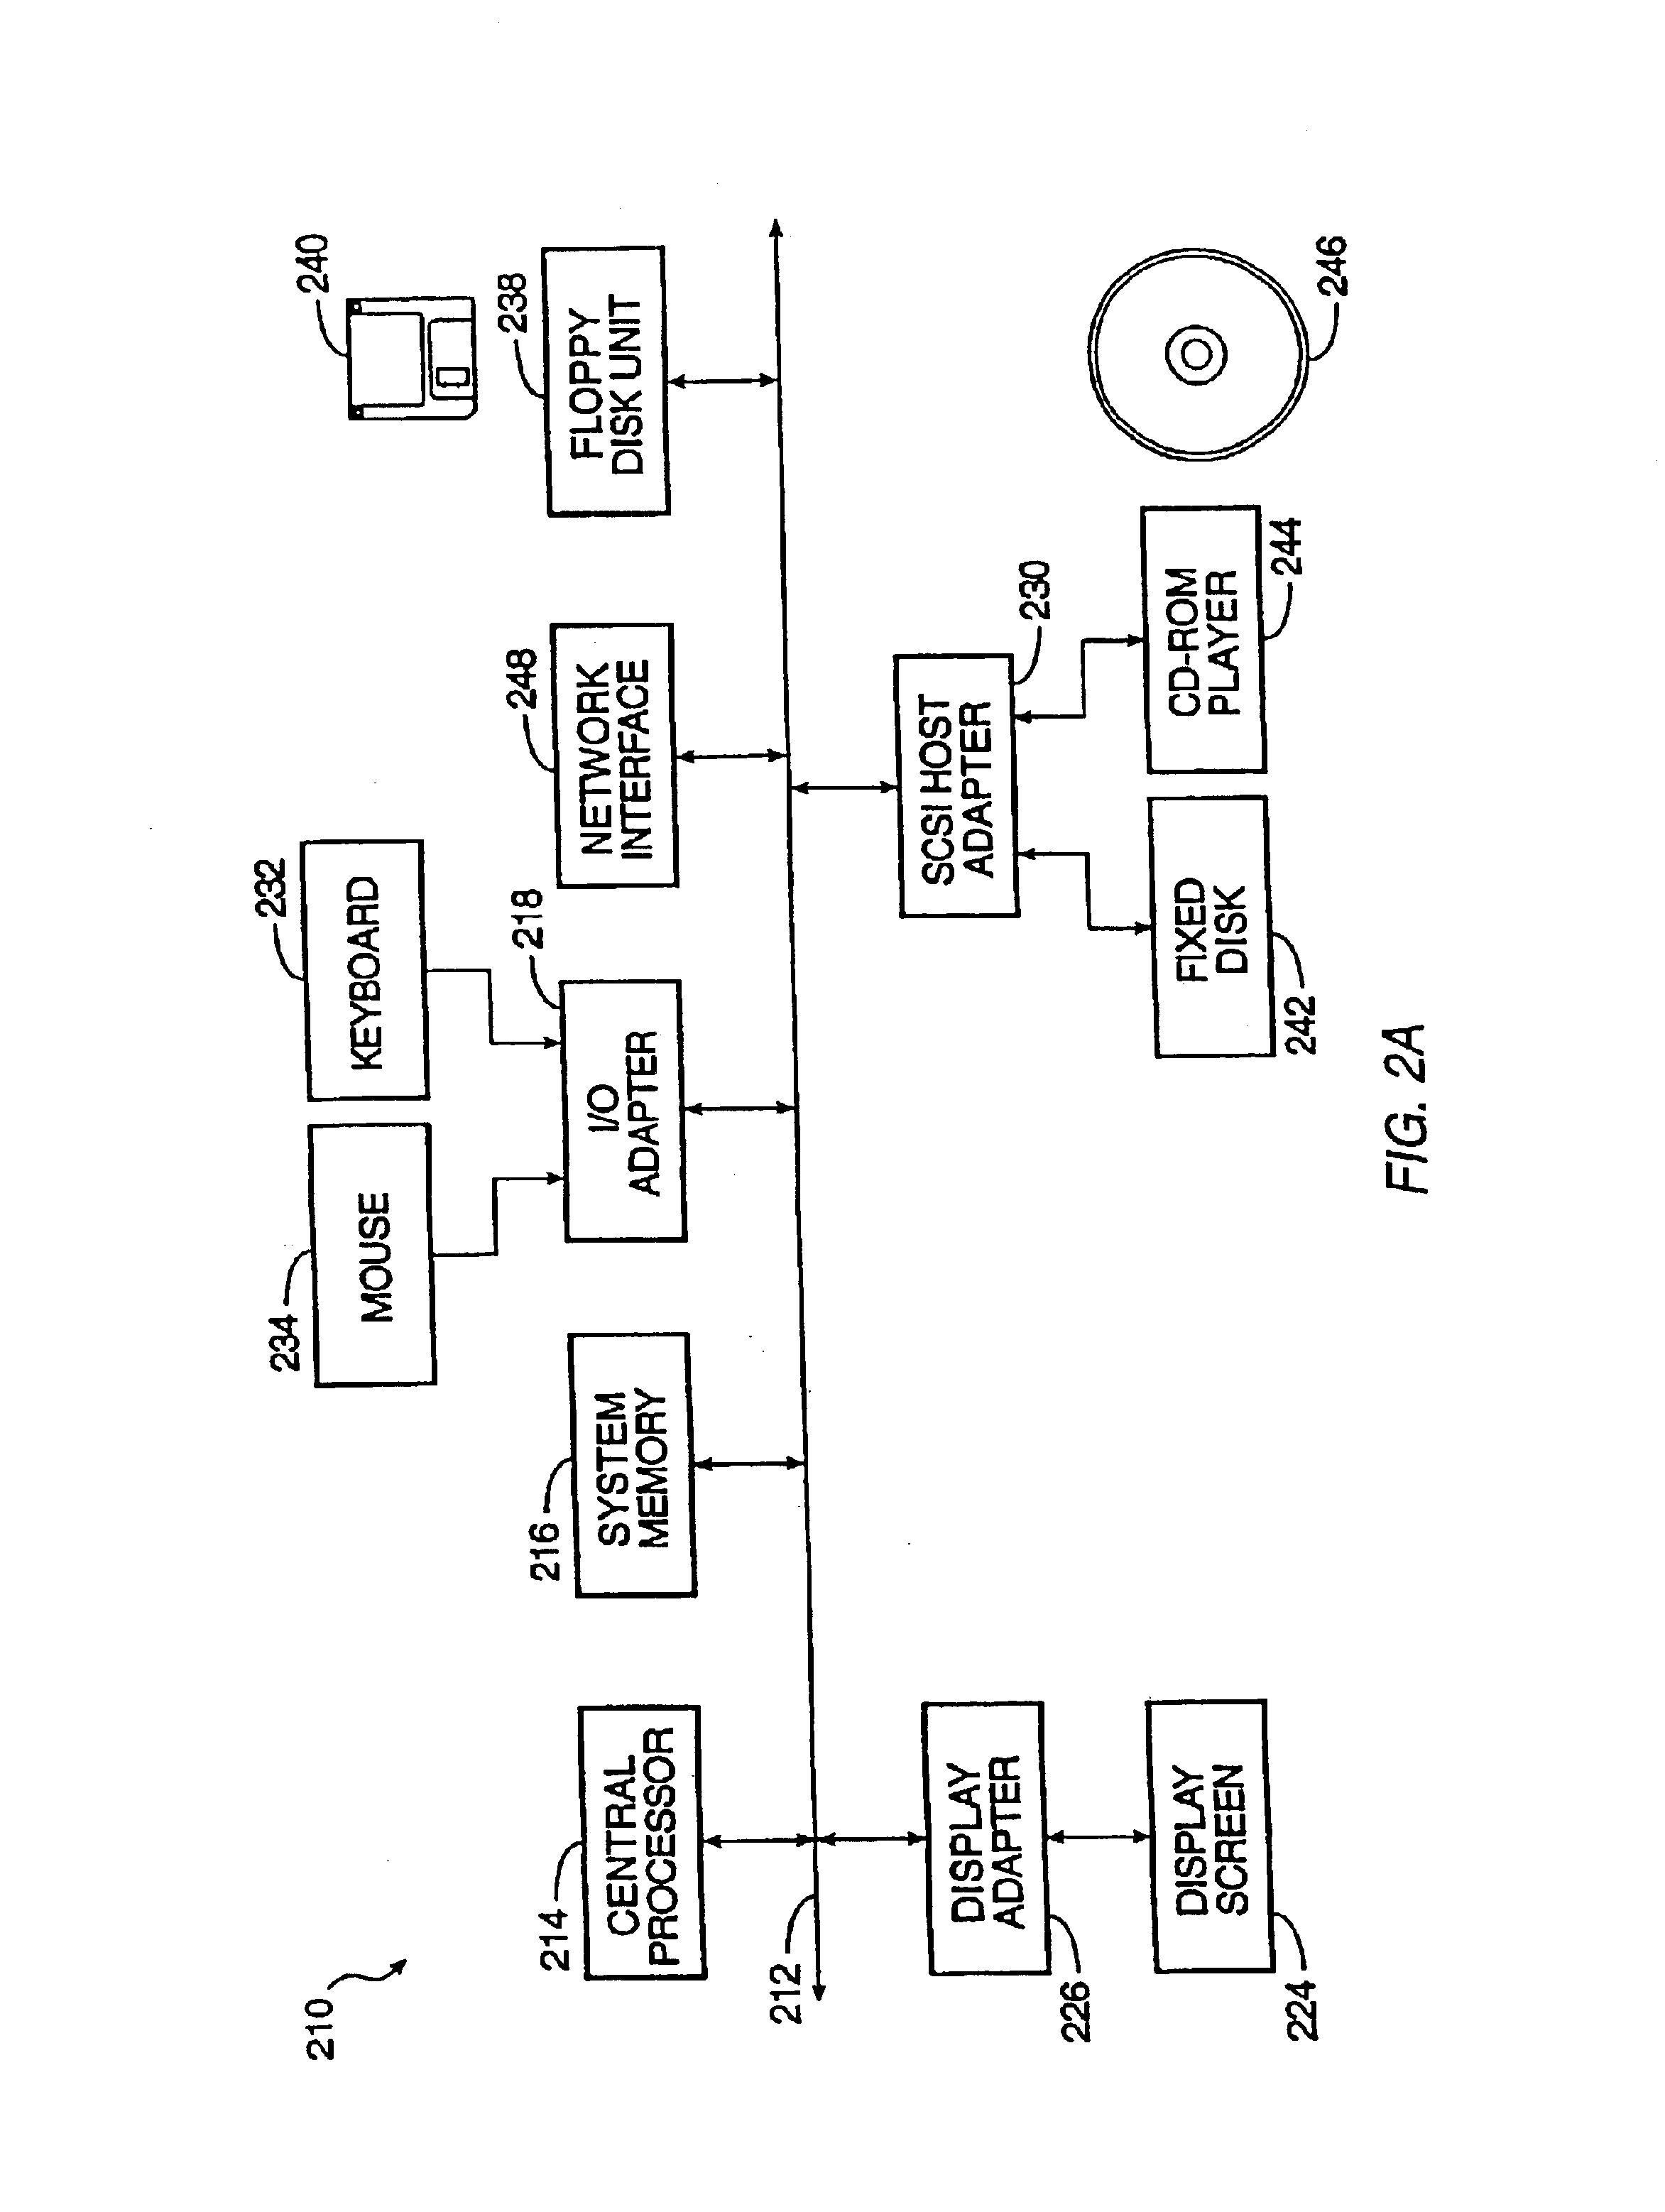 Method and apparatus for providing a bioinformatics database